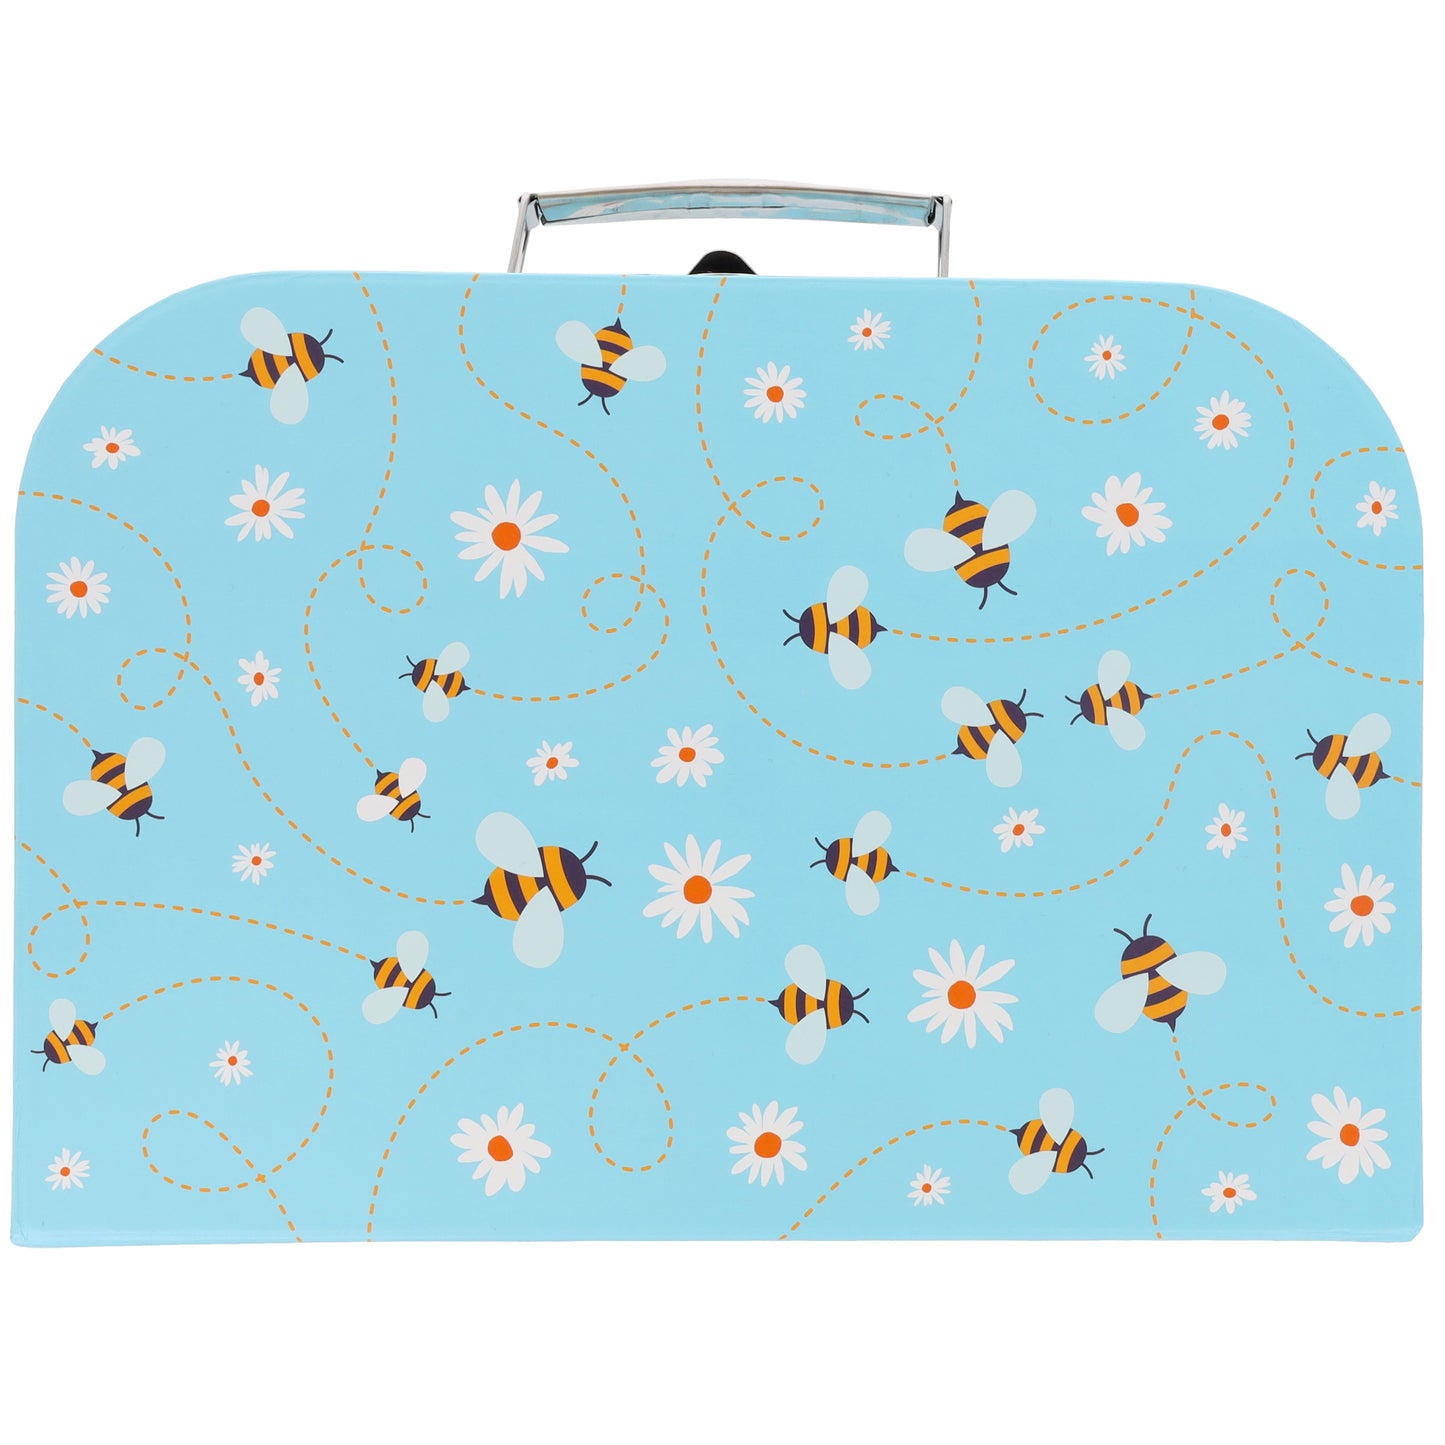 Personalised Storage Suitcase Filled Kids Gift Set  - Always Looking Good - Small Blue Bee  